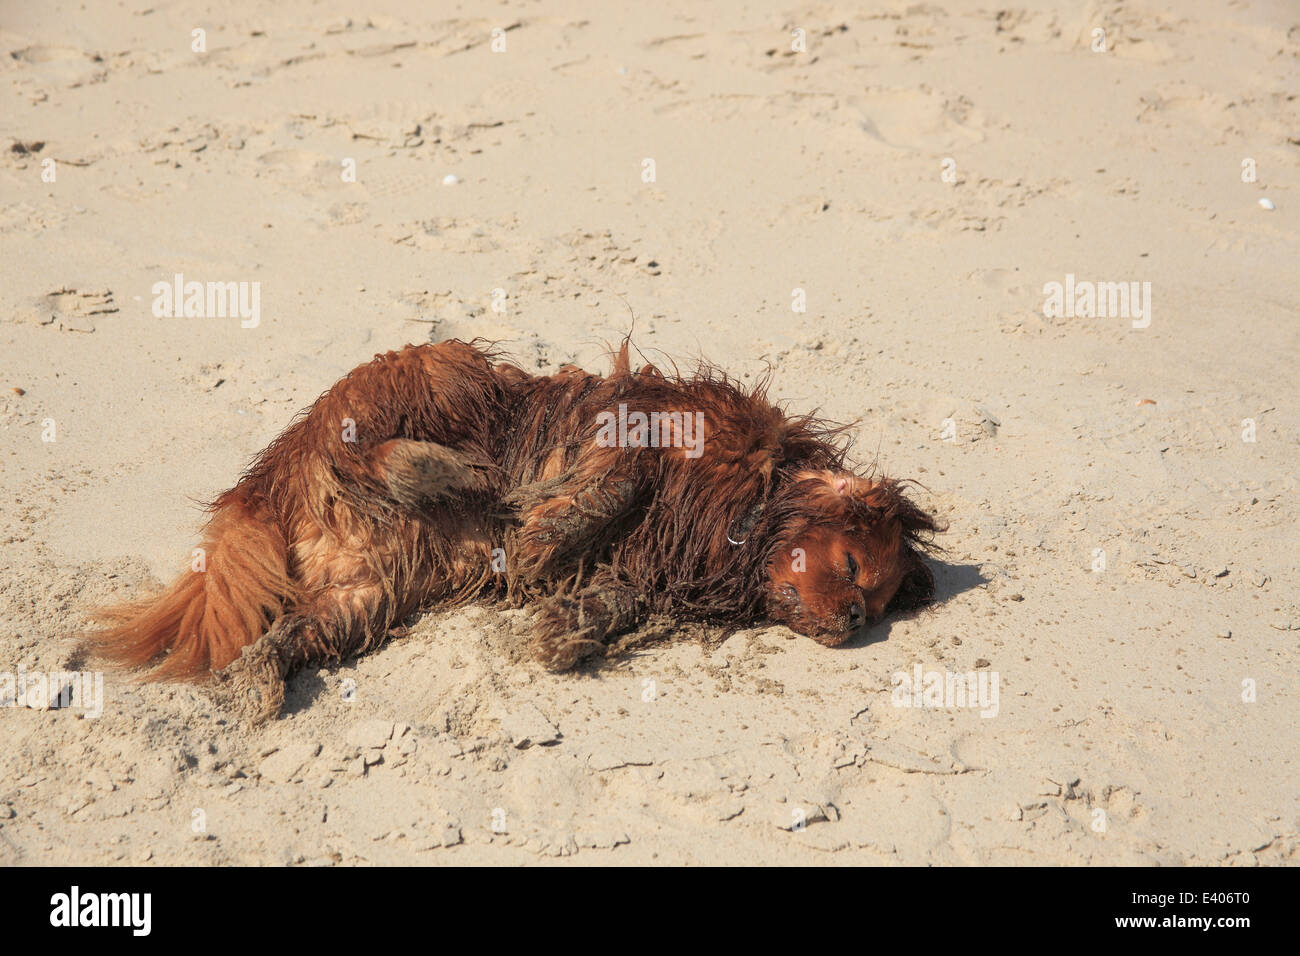 Cavalier King Charles Spaniel, male, ruby, rolling in sand, De Cocksdorp, Texel, Netherlands Stock Photo